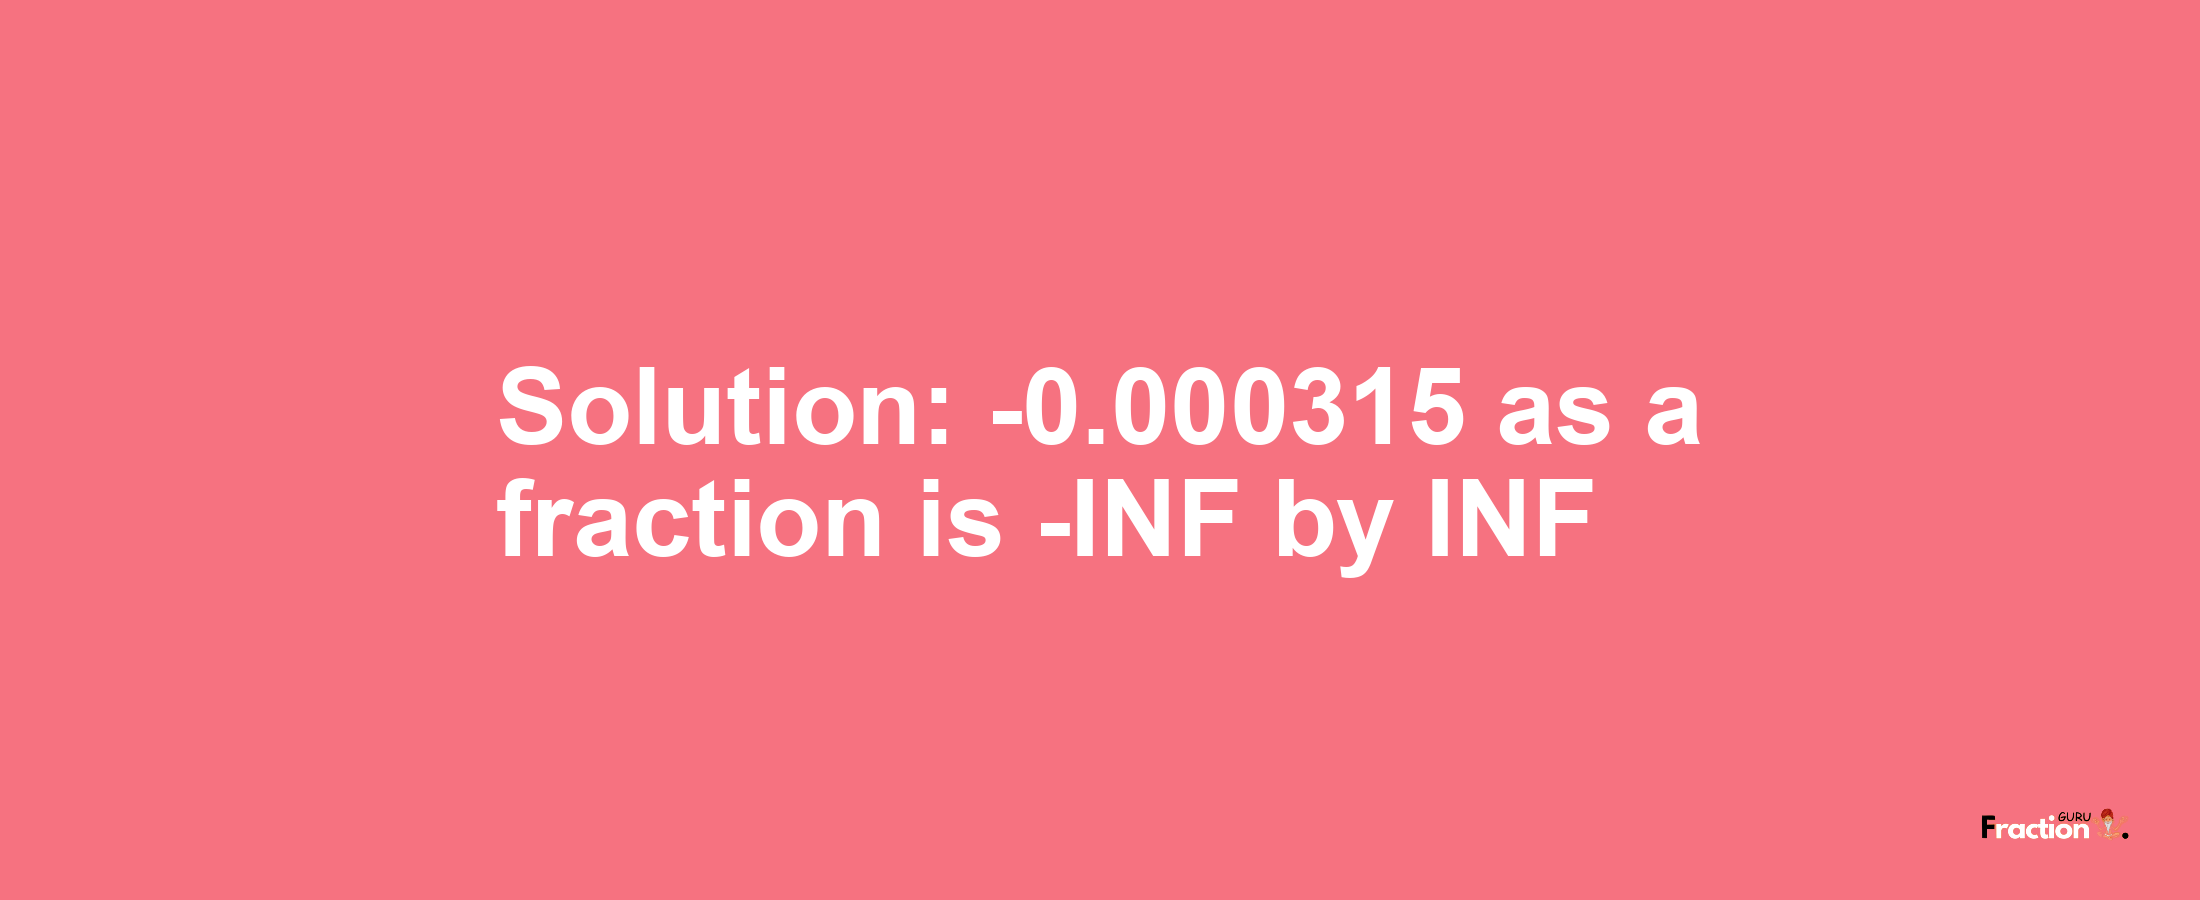 Solution:-0.000315 as a fraction is -INF/INF